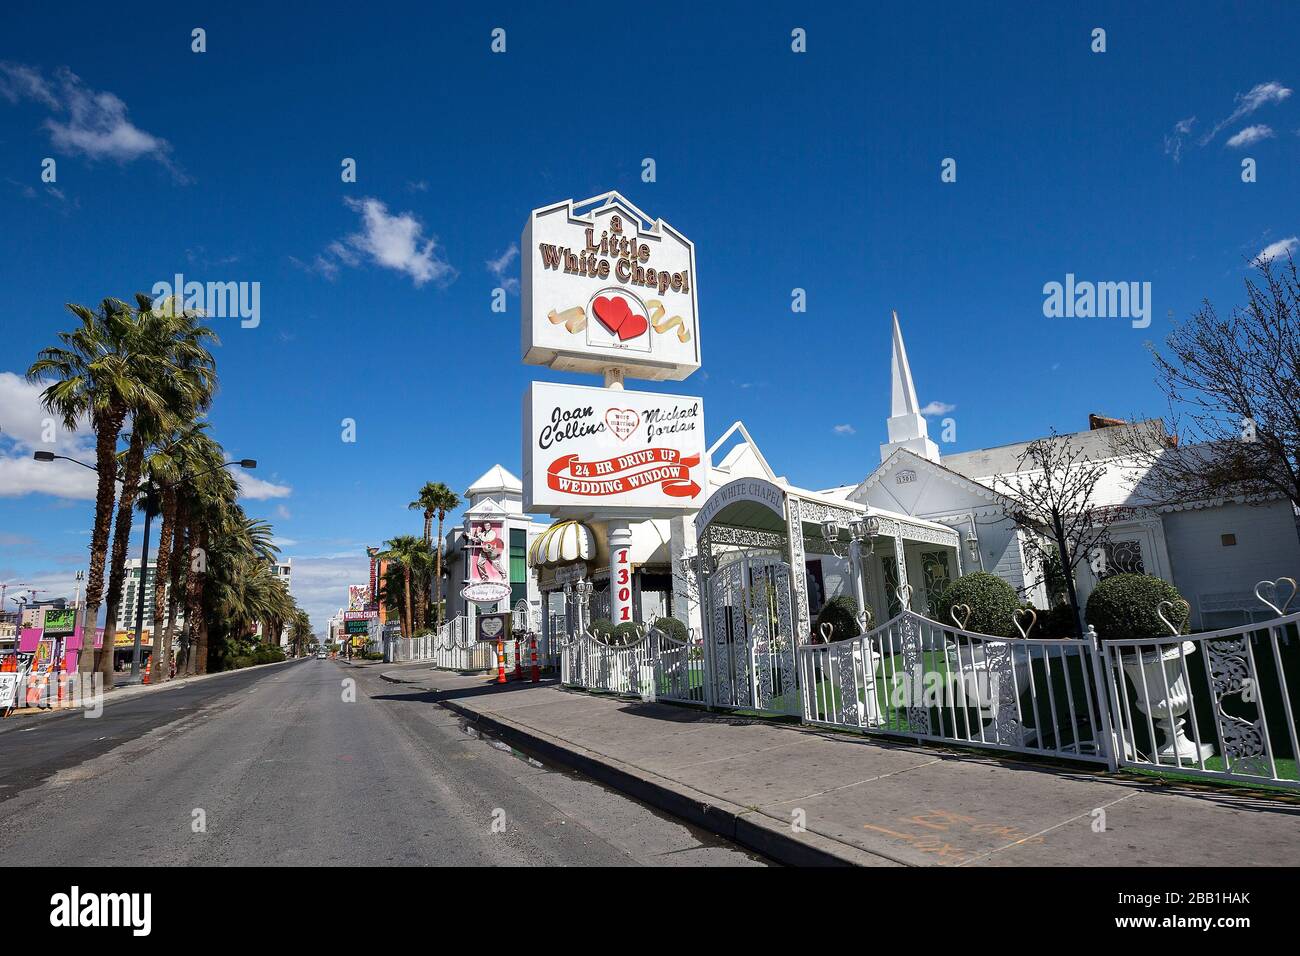 General view of A Little White Chapel amid the global coronavirus COVID-19 pandemic, Monday, March 23, 2020, in Las Vegas. (Photo by IOS/Espa-Images) Stock Photo